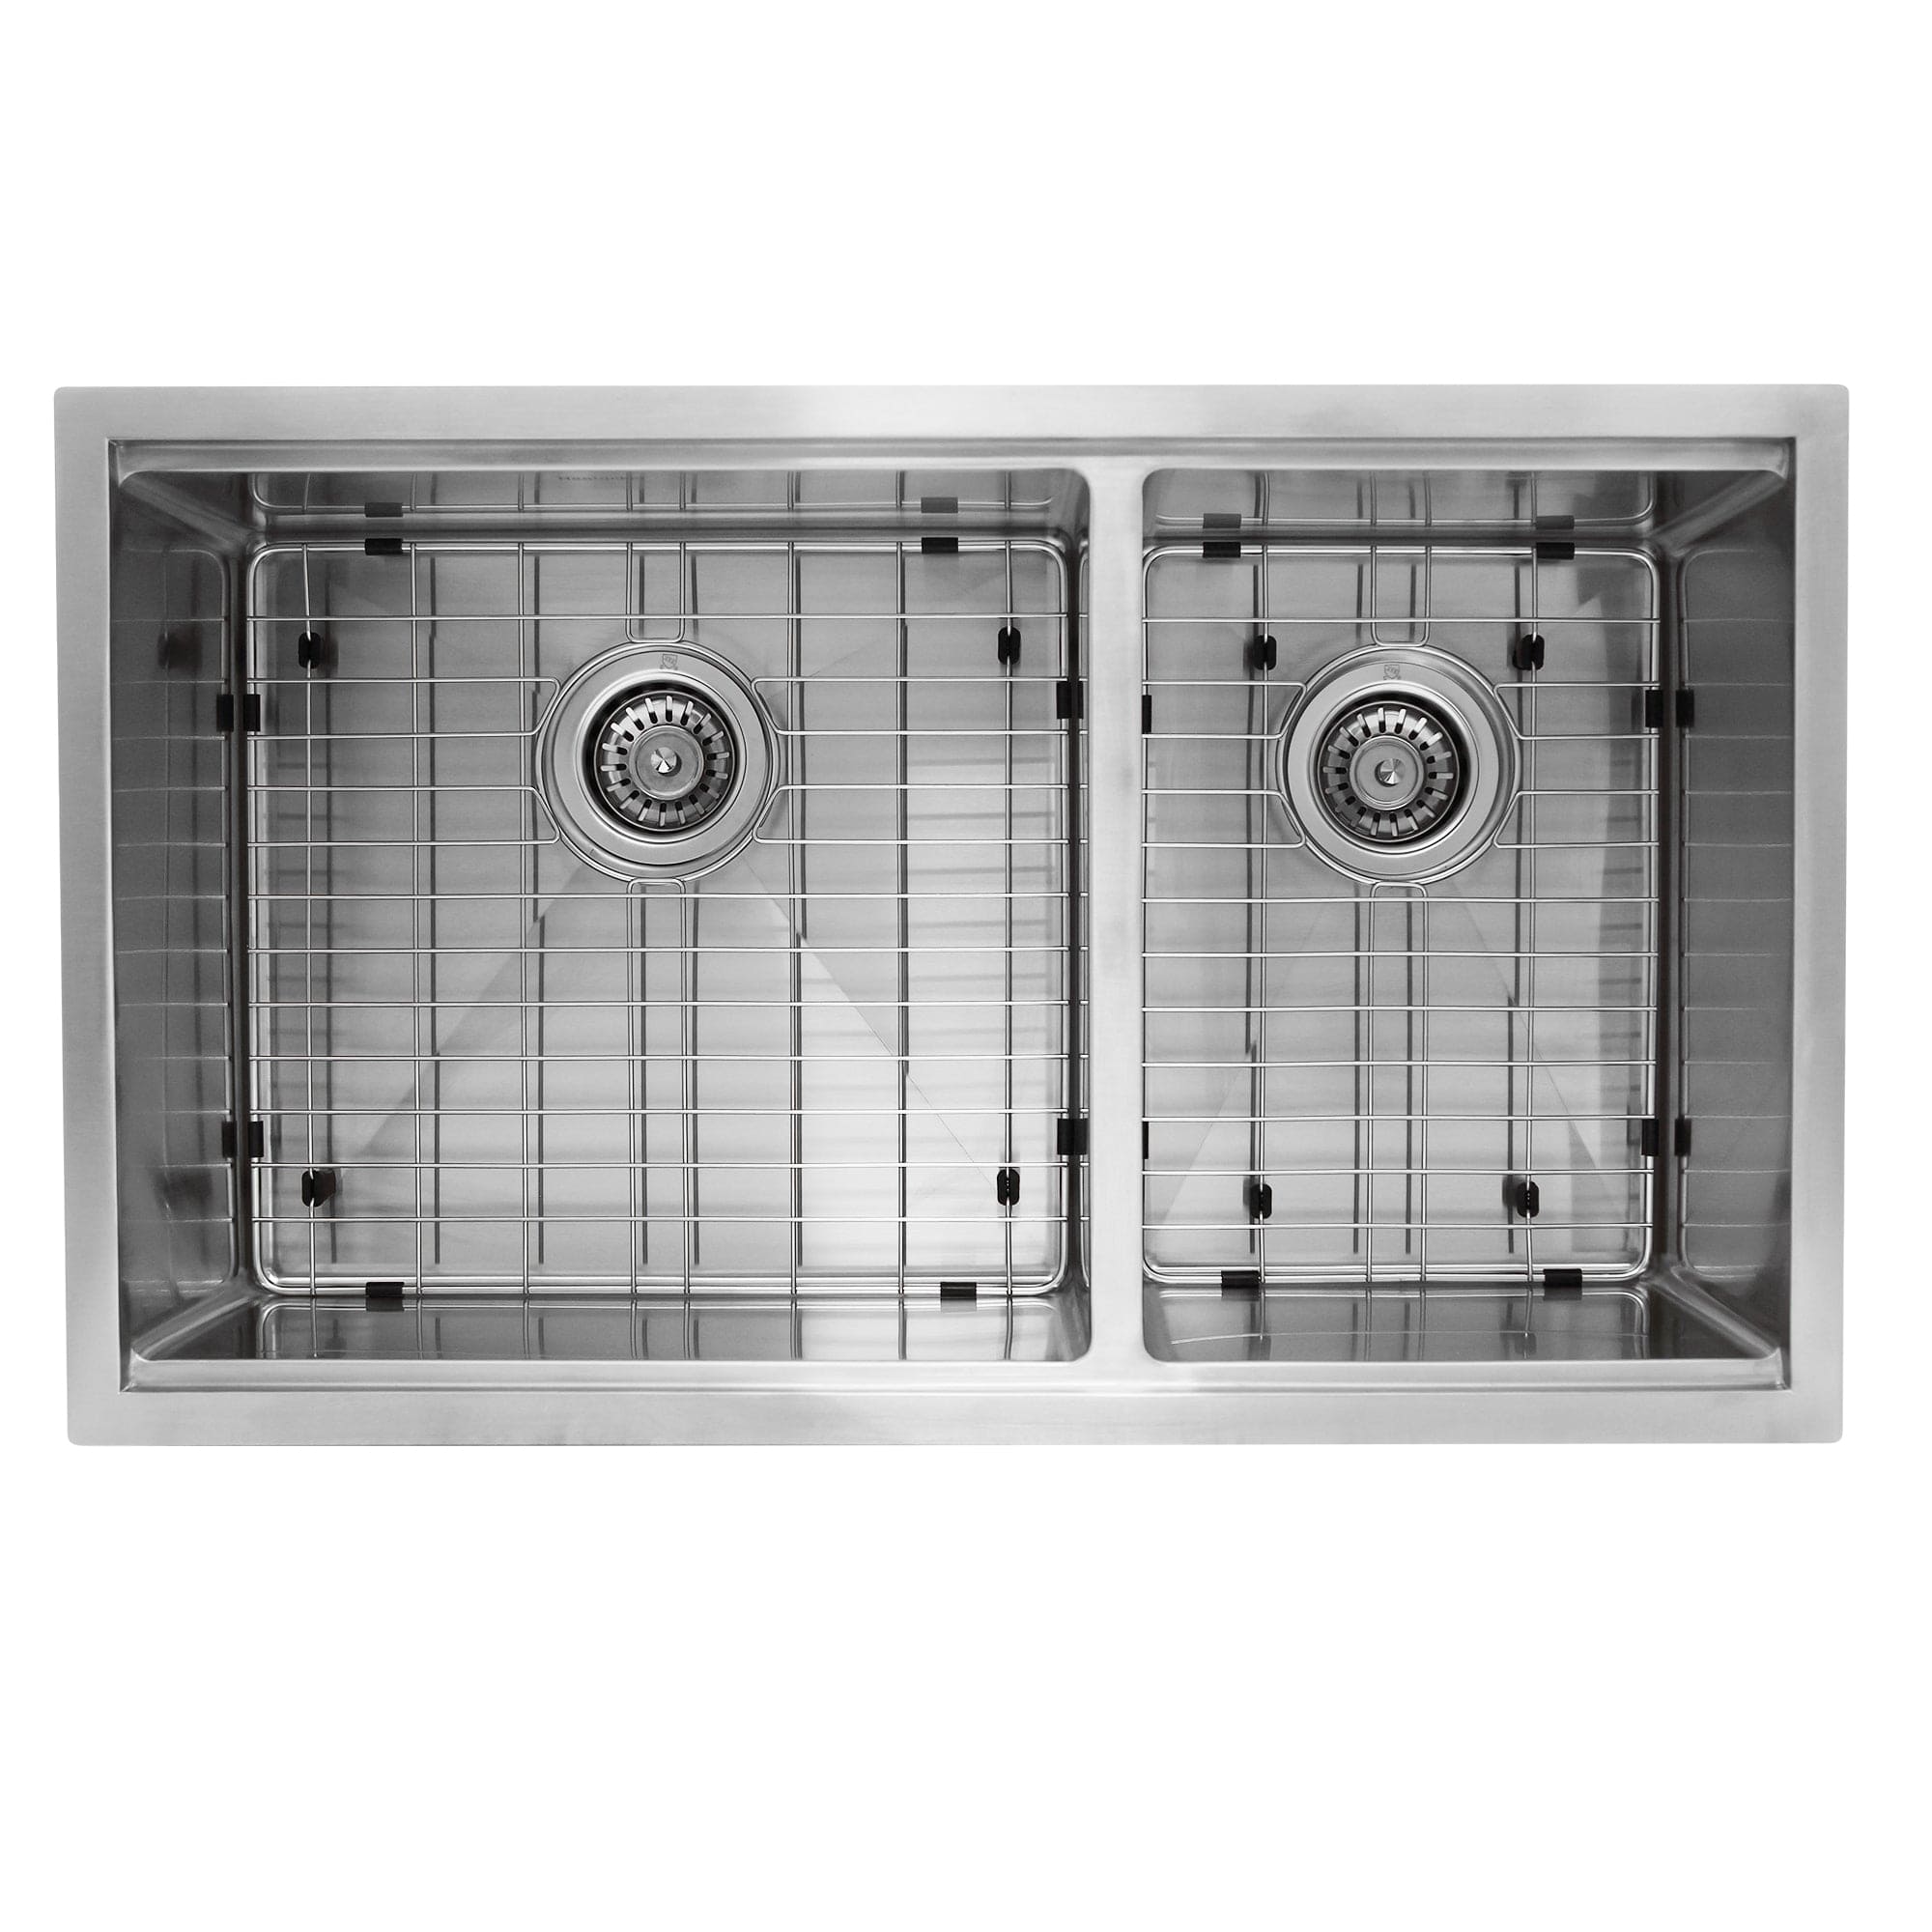 Nantucket 32" Undermount Stainless Sink SR-PS-3219-OS-16